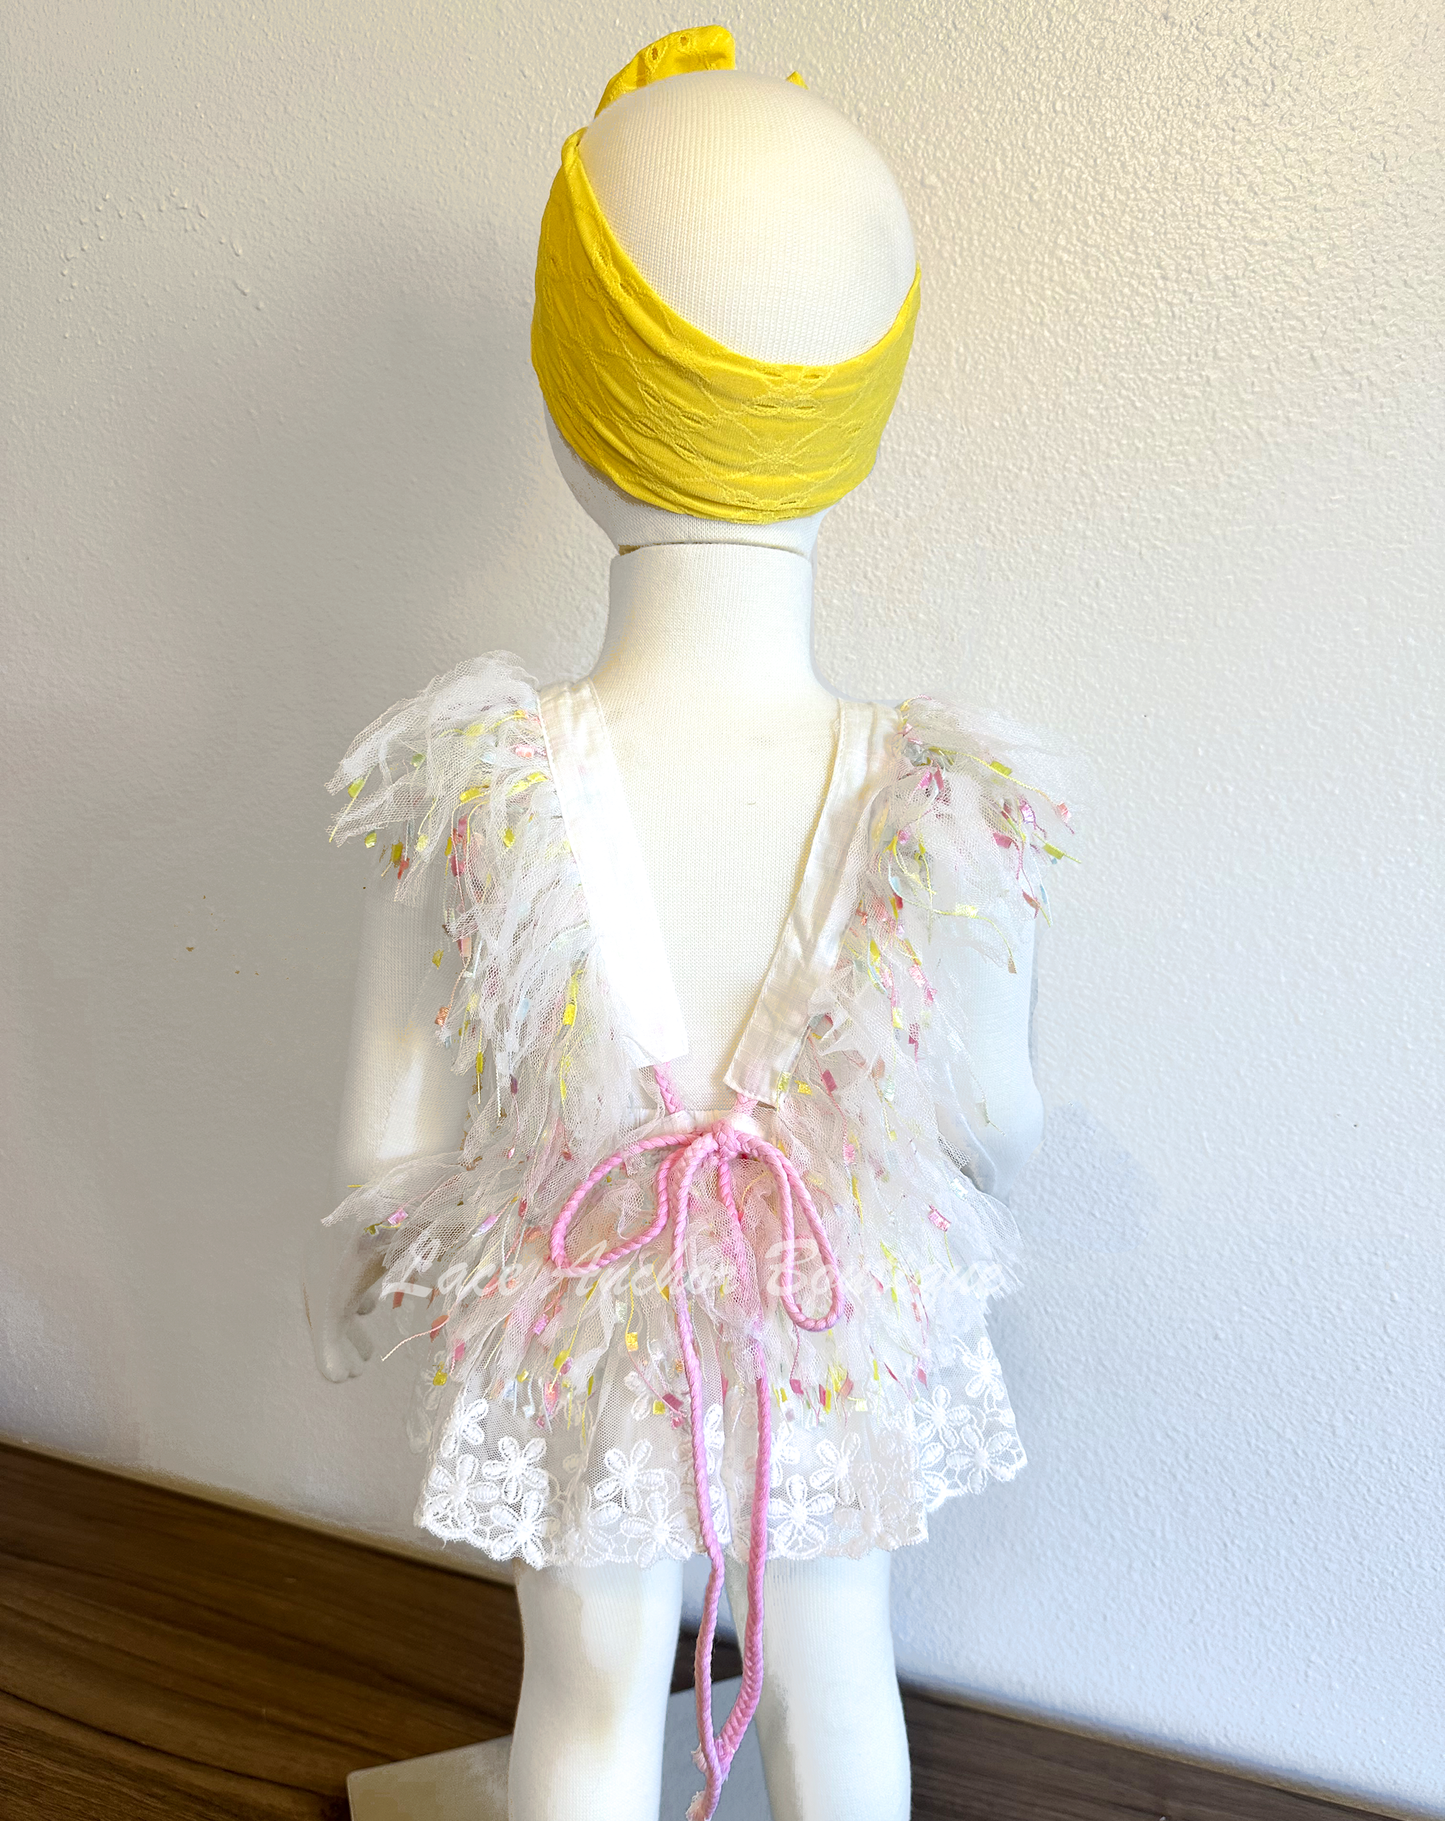 white lace baby girls romper with multi colored pastel rainbow confetti fringe, yellow, blue, and peach embroidered butterflies, and lace skirt. Baby girl first birthday smash cake outfit.